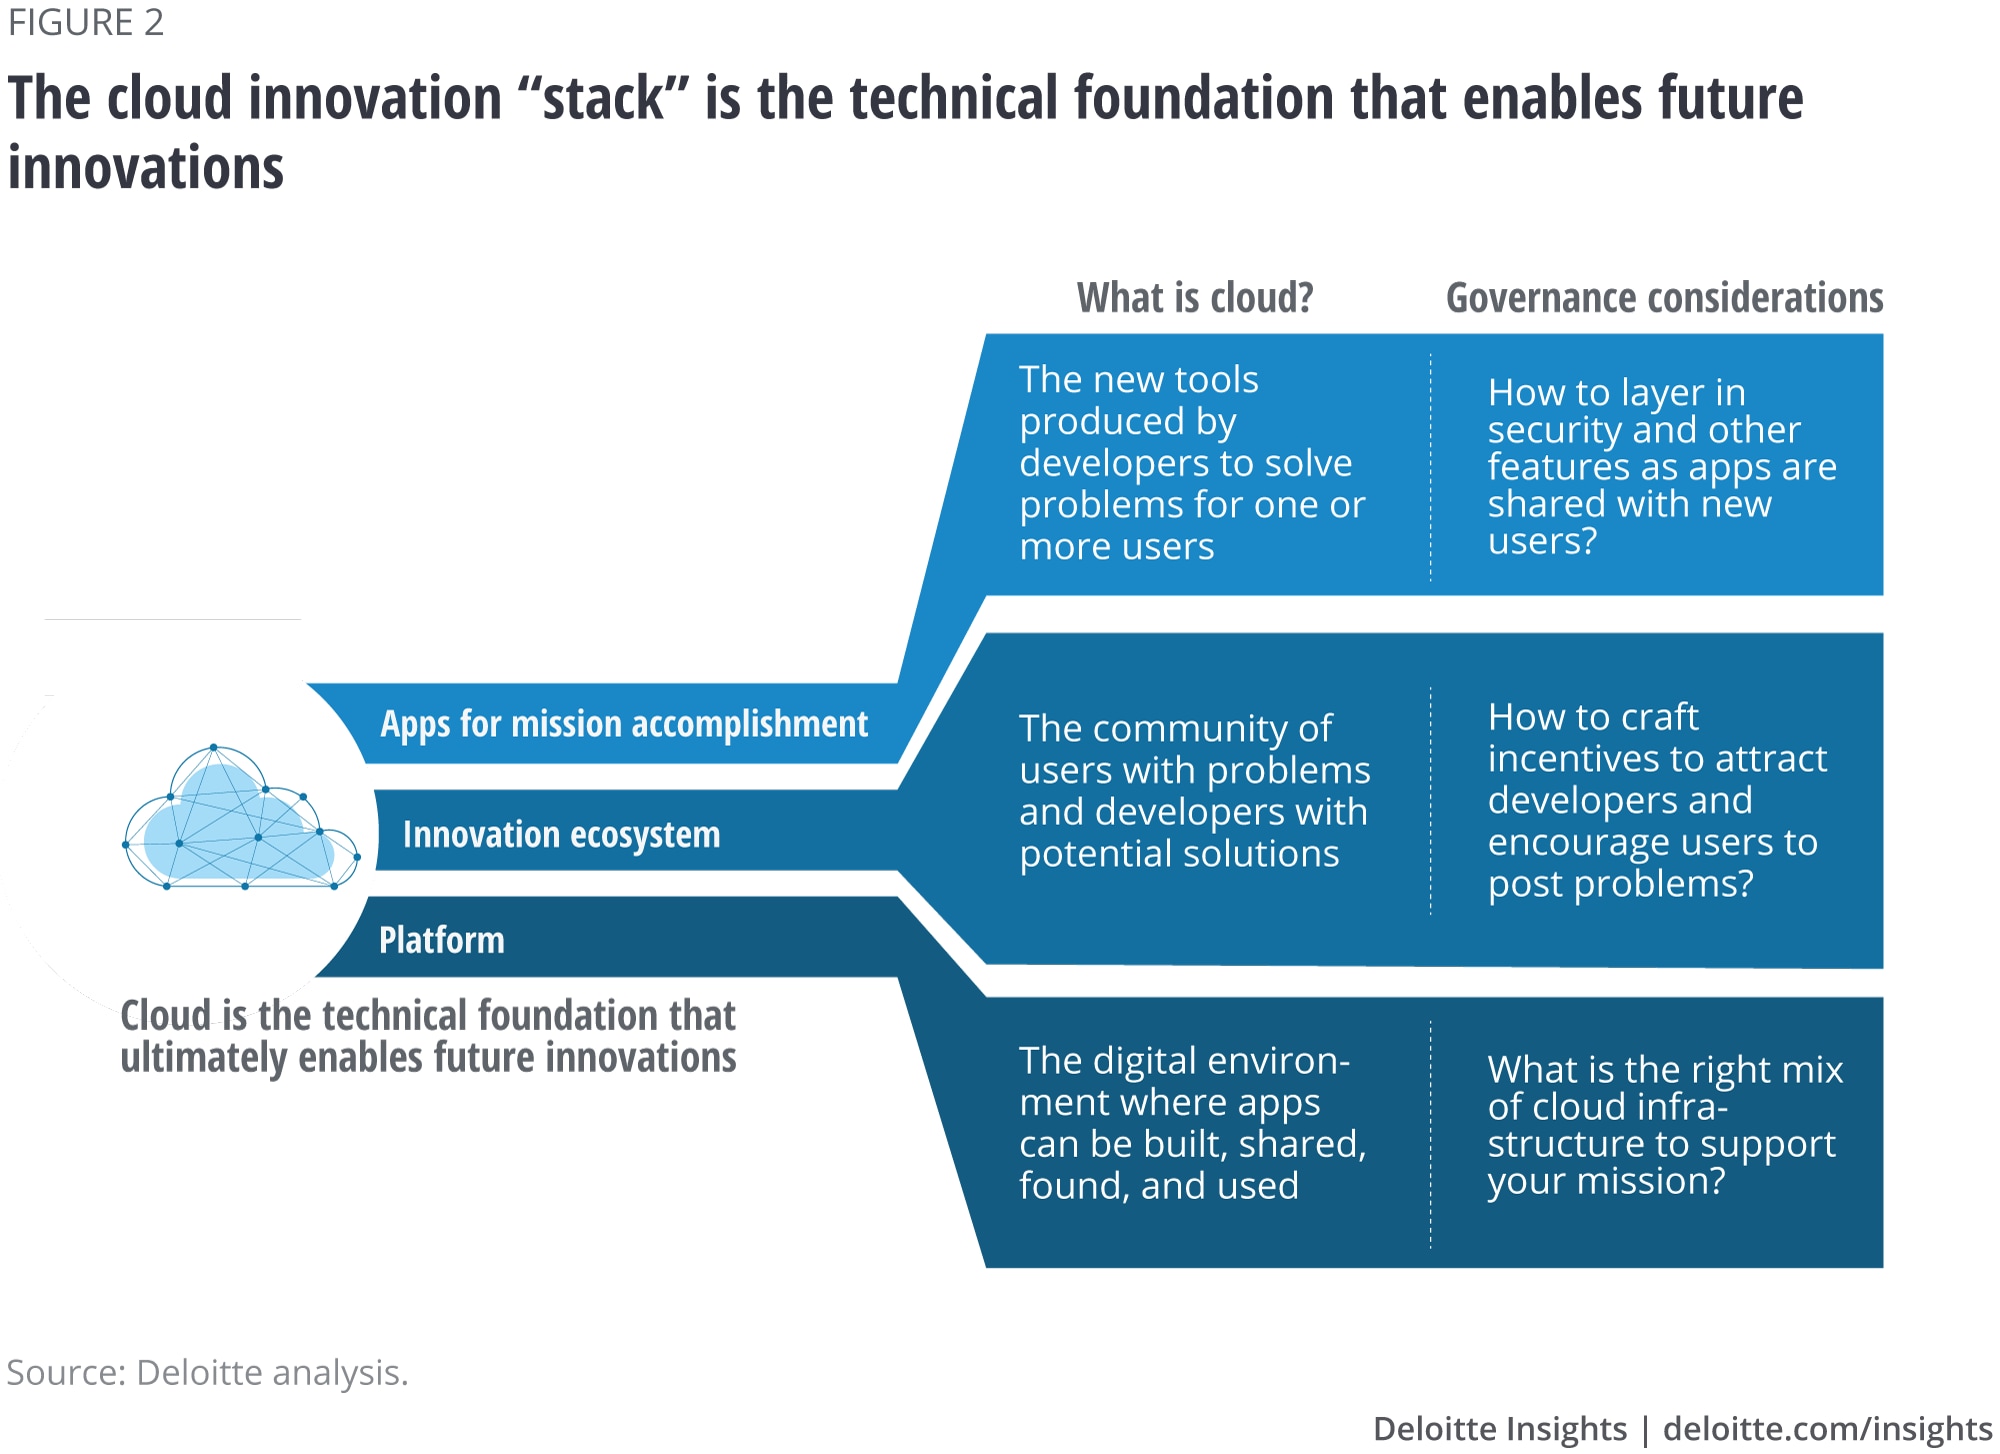 The cloud innovation “stack” is the technical foundation that enables future innovations